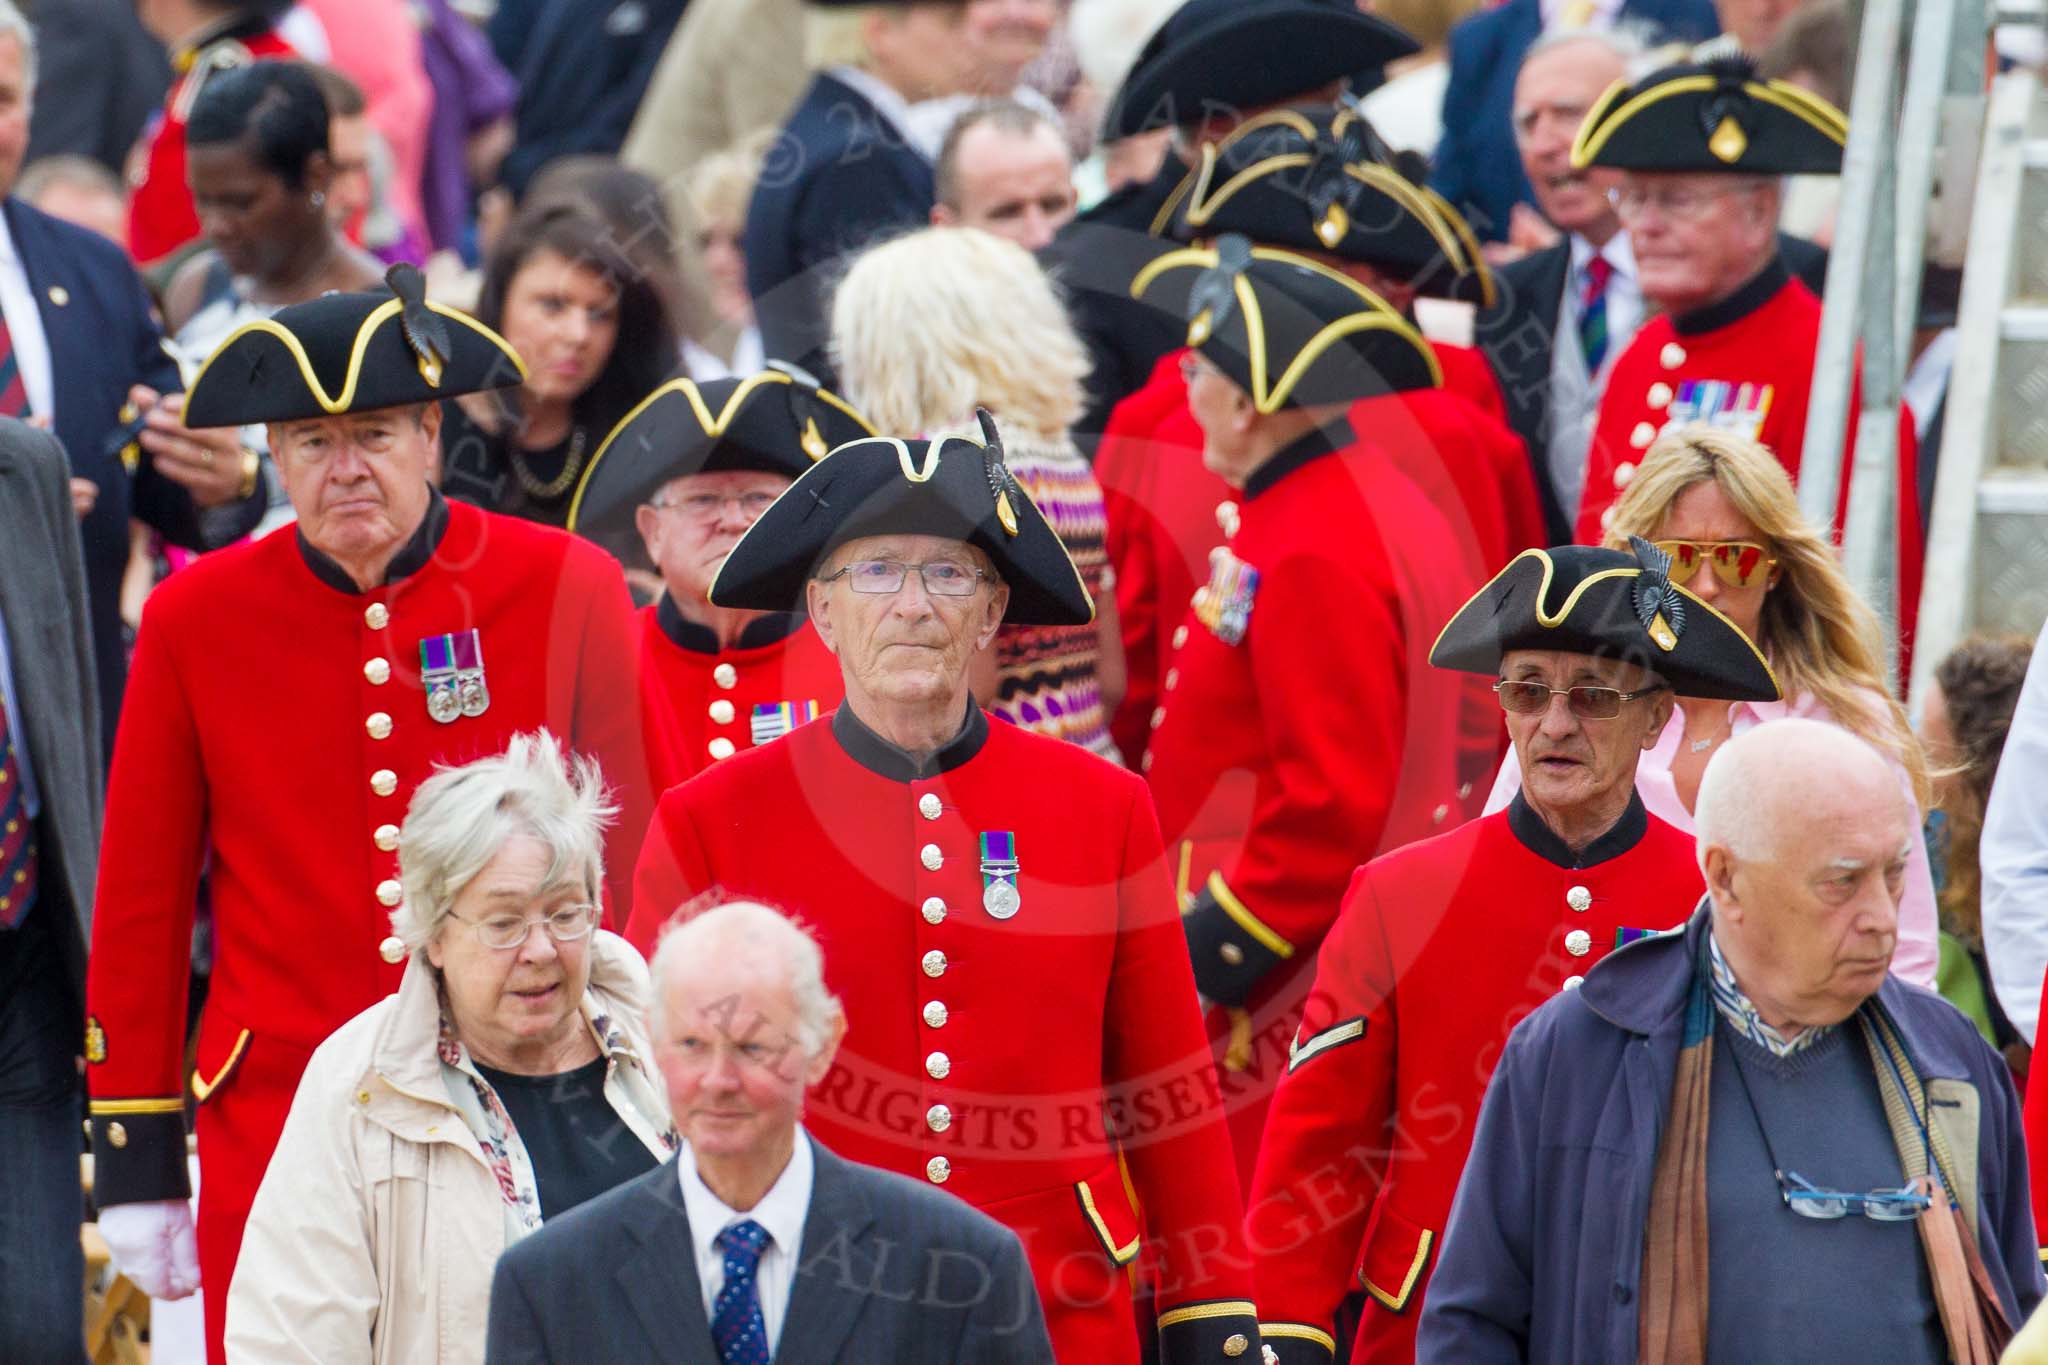 Trooping the Colour 2014.
Horse Guards Parade, Westminster,
London SW1A,

United Kingdom,
on 14 June 2014 at 12:19, image #925